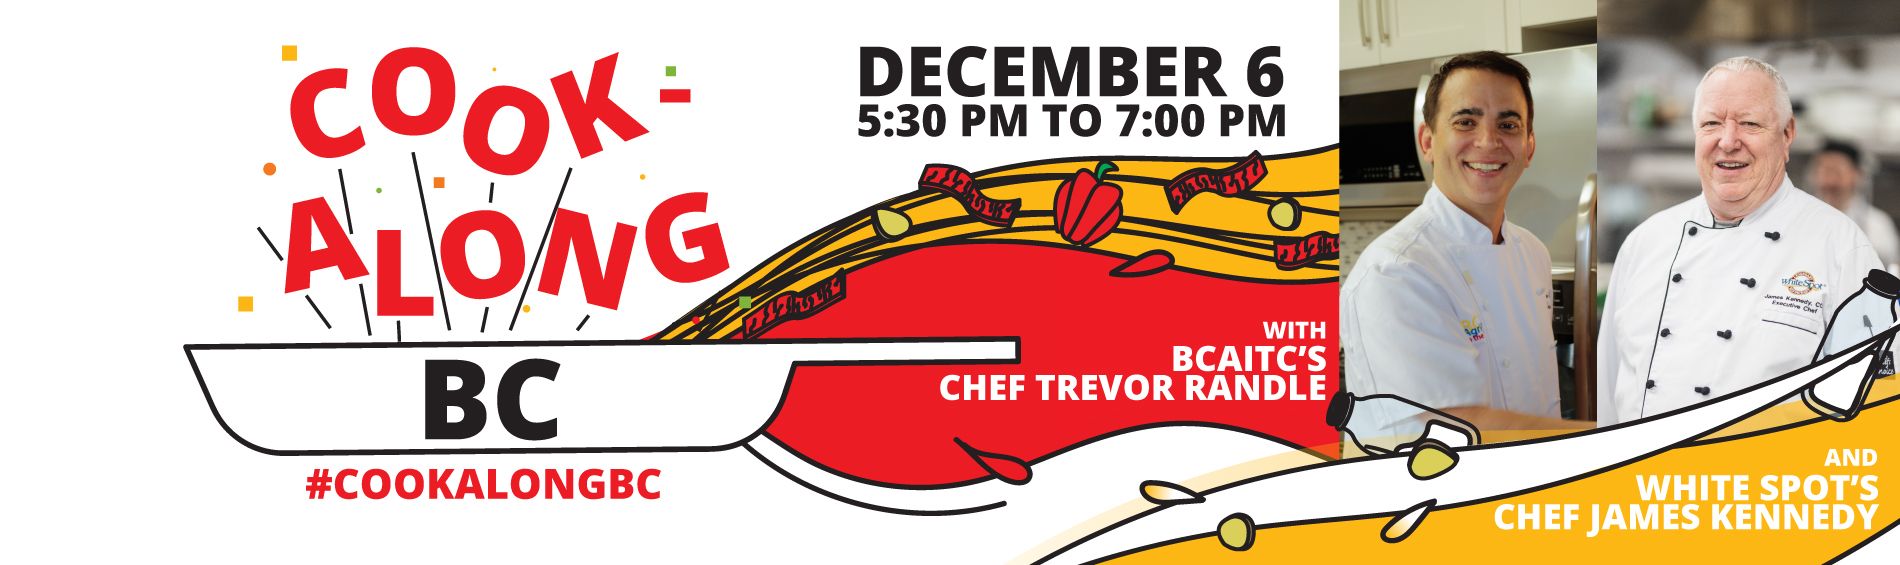 Cook-Along BC Event - December 6